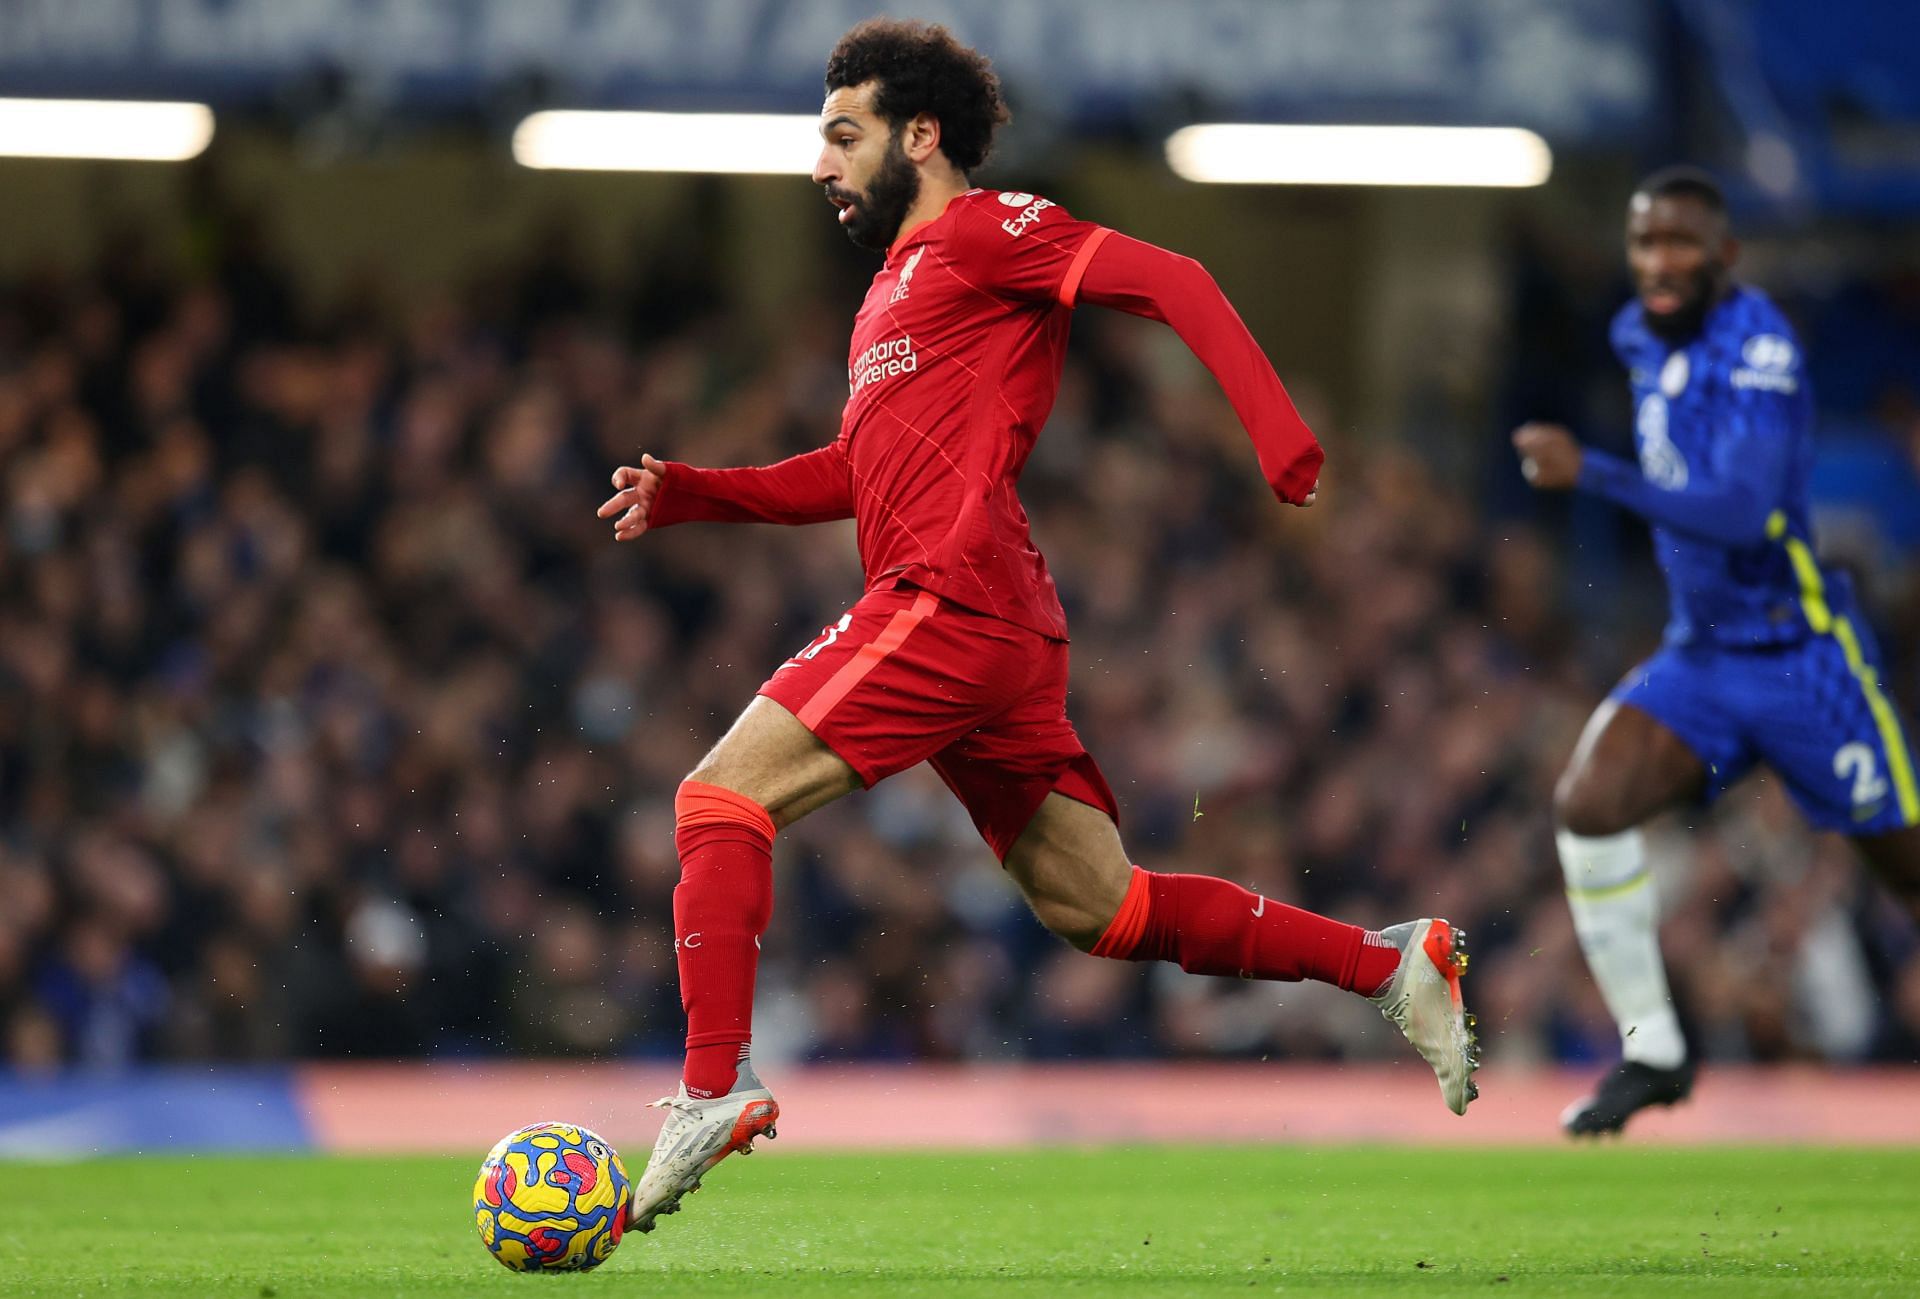 Mohamed Salah has been one of the most in-form players this season.